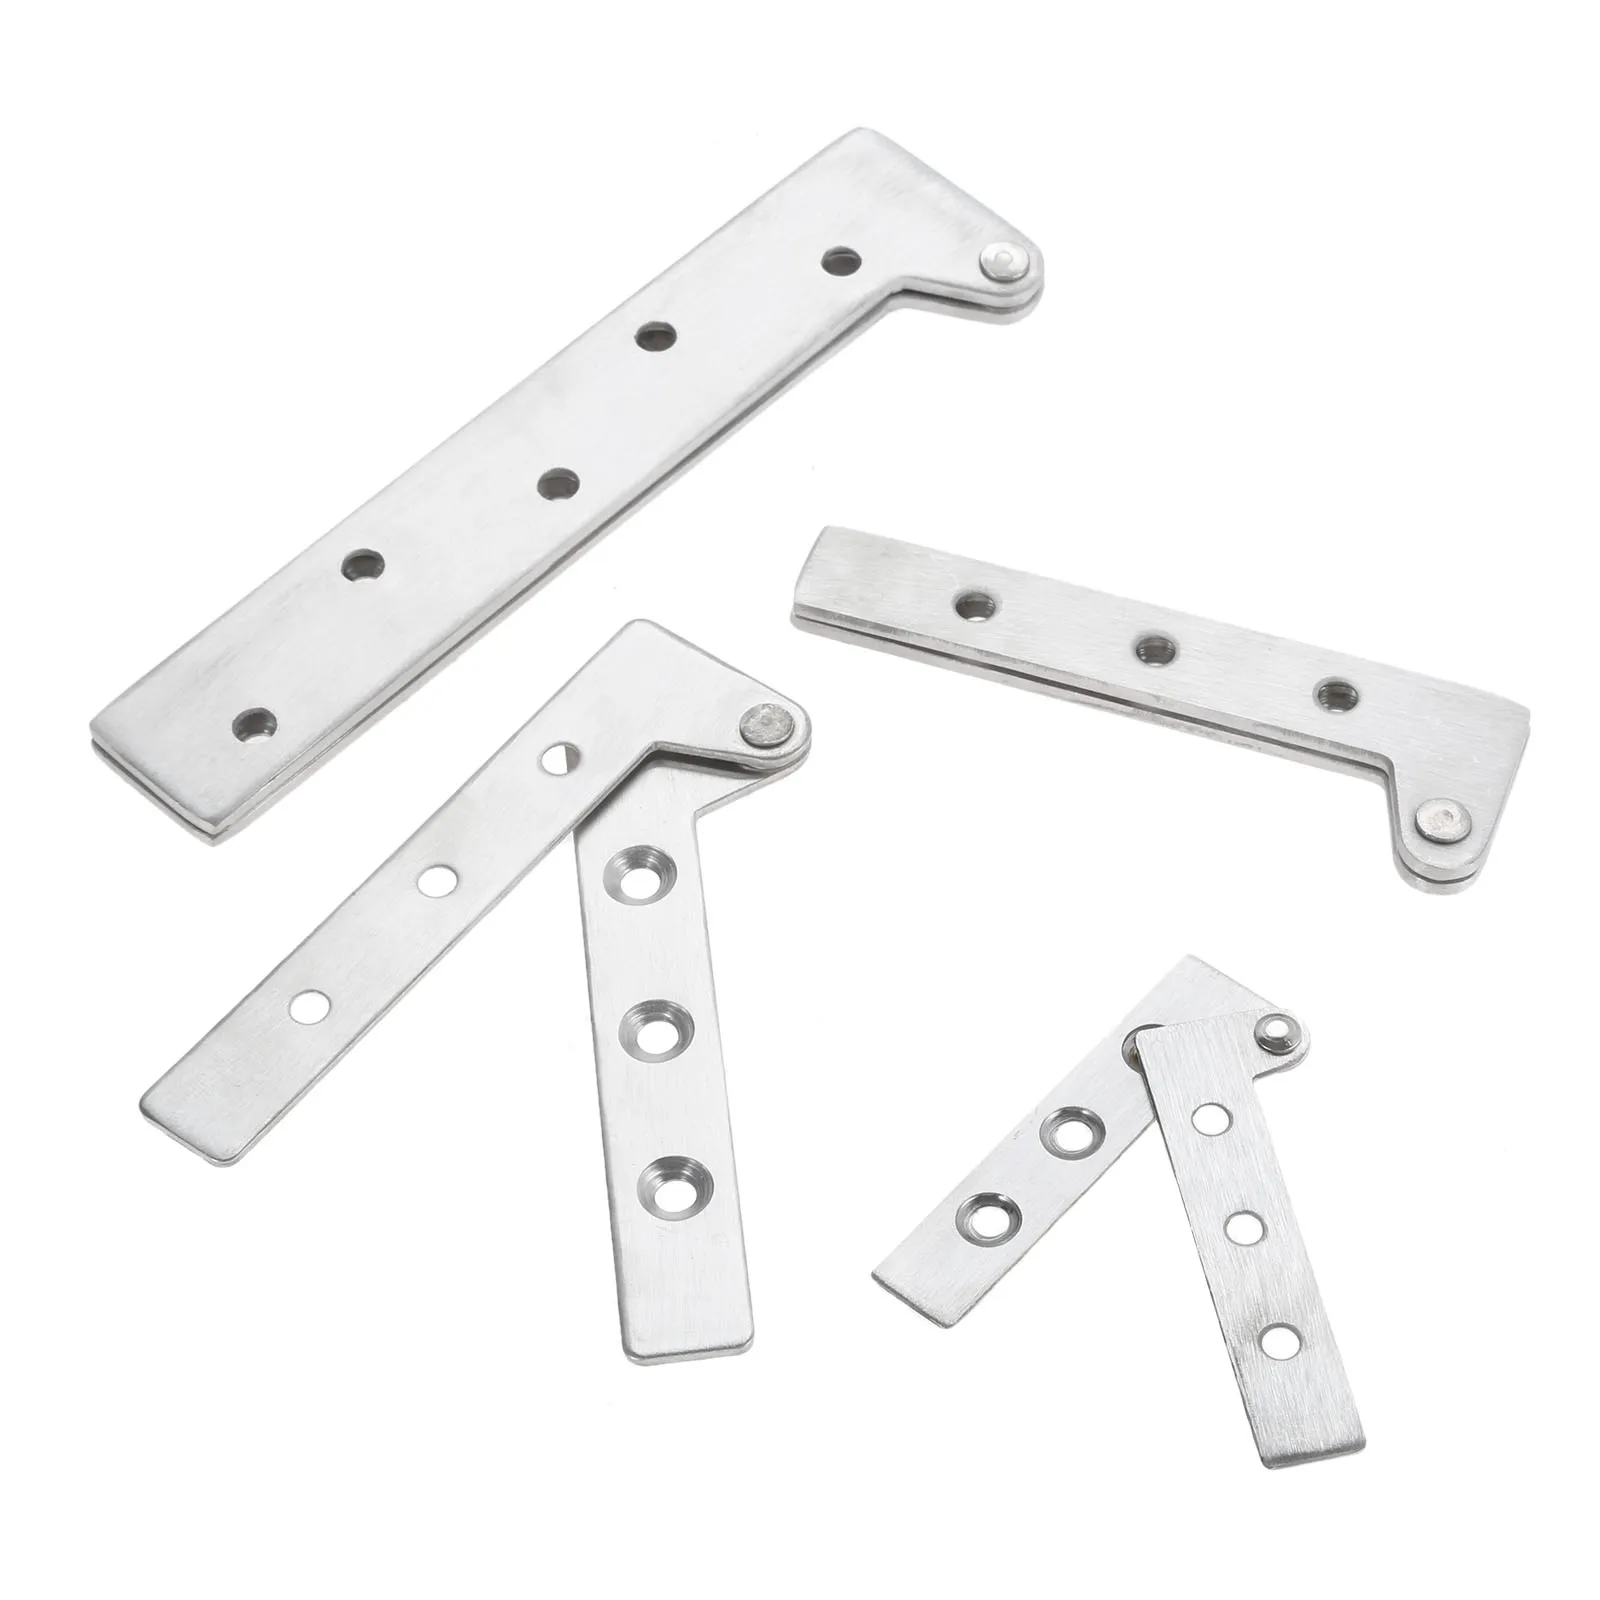 2pcs Pivot Hinges Offset Knife Hinges Inset Door Stainless Steel 360 Degree Rotating Hinges